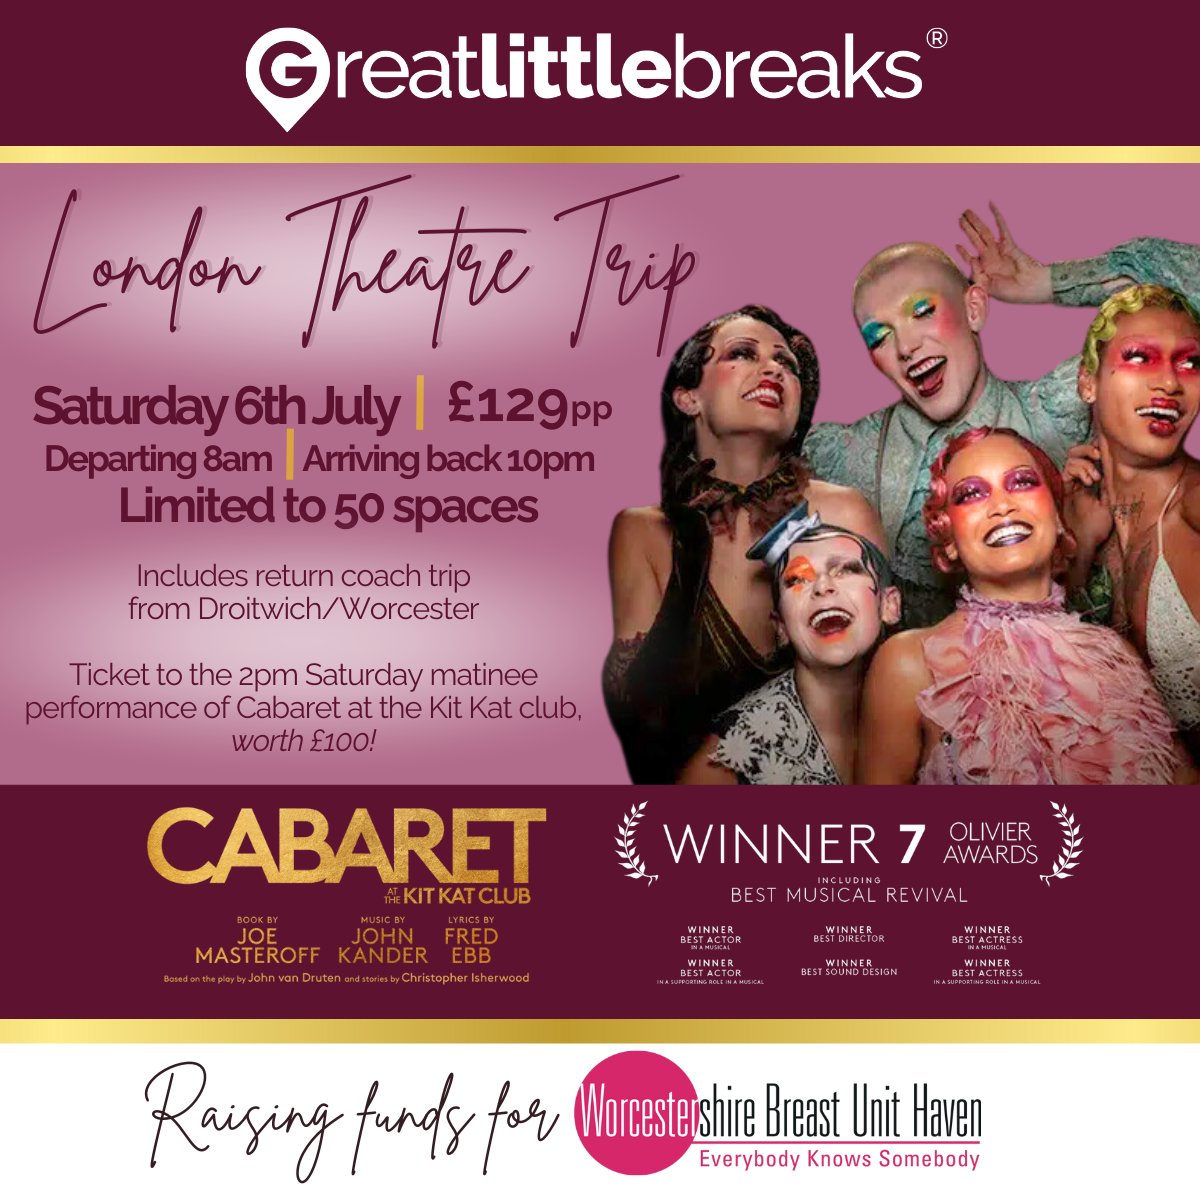 - London theatre Trip - 

Tickets are selling fast... make sure that you don't miss out!

£129 per person | Limited to 50 tickets | Saturday 6th July | Matinee ticket to Cabaret at the KitKat Club London

BOOK YOUR TICKET HERE:
lnkd.in/ehws-xg9